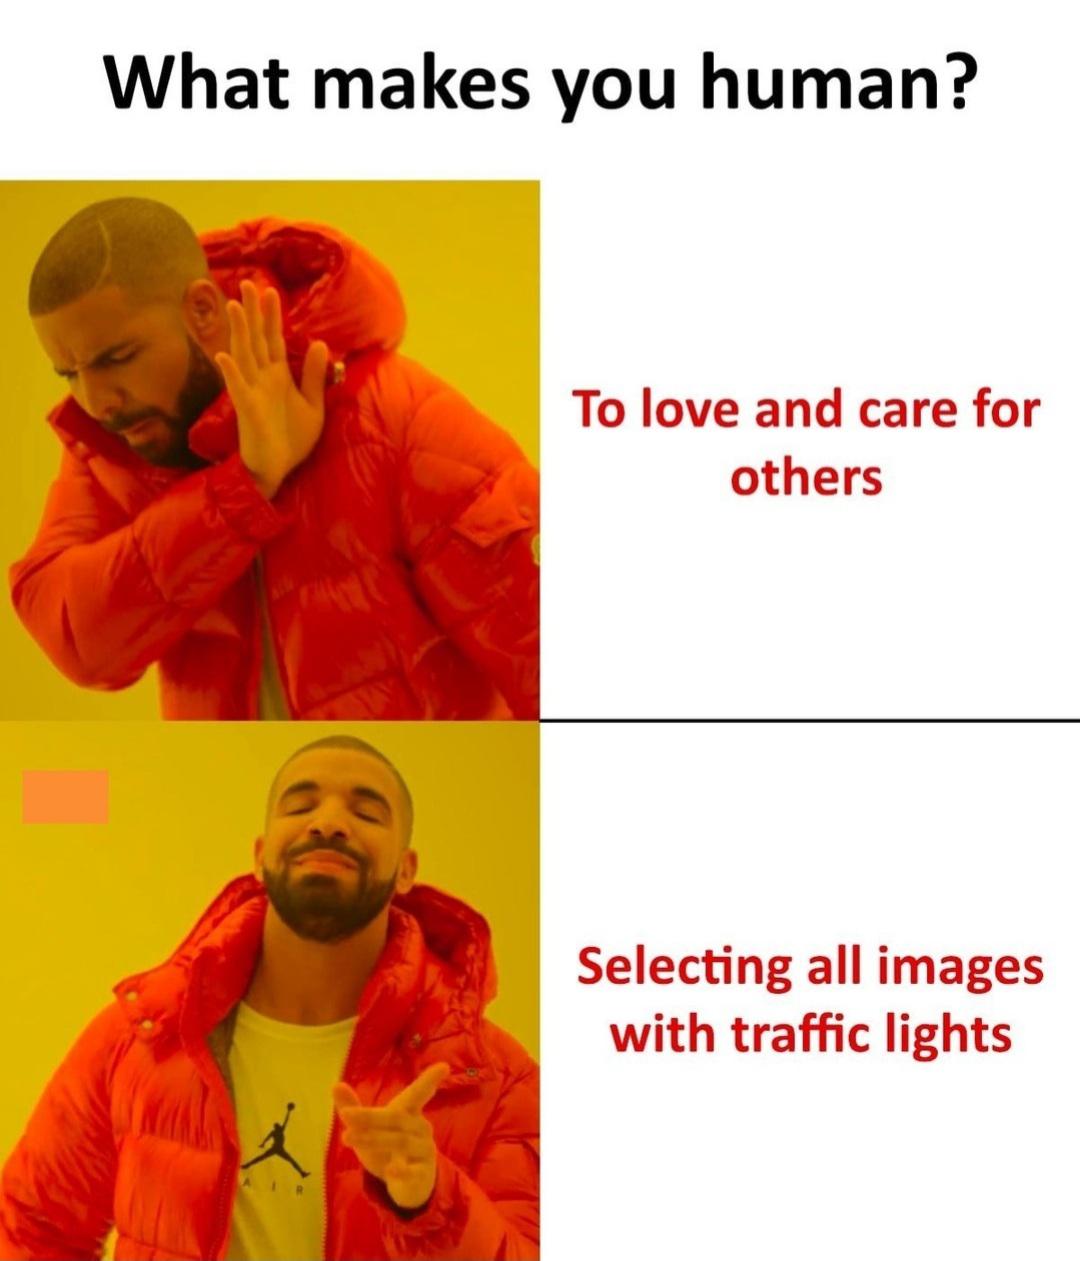 dank memes - corona virus clean memes - What makes you human? To love and care for others Selecting all images with traffic lights all Air